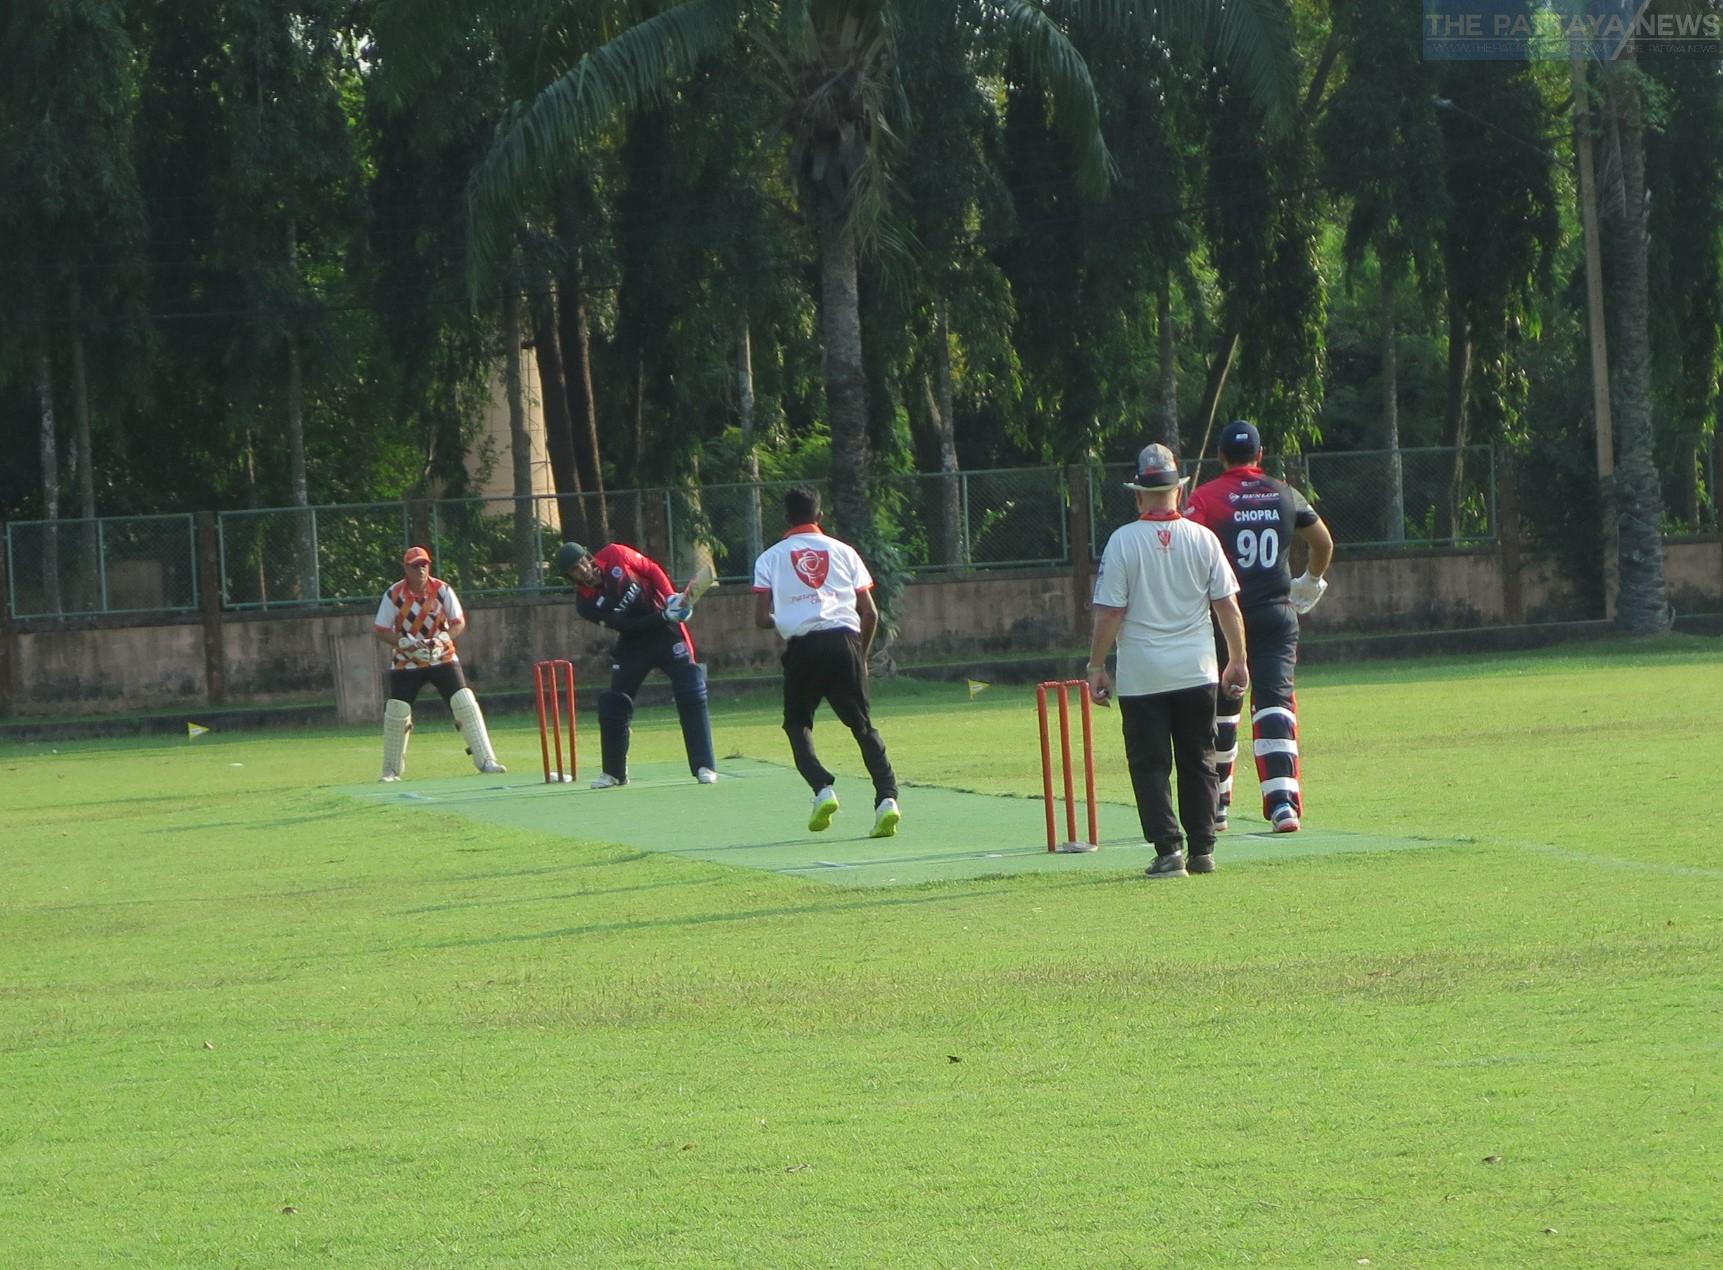 Pattaya Cricket Club Inflicts a Massive Defeat upon the British Cricket Club